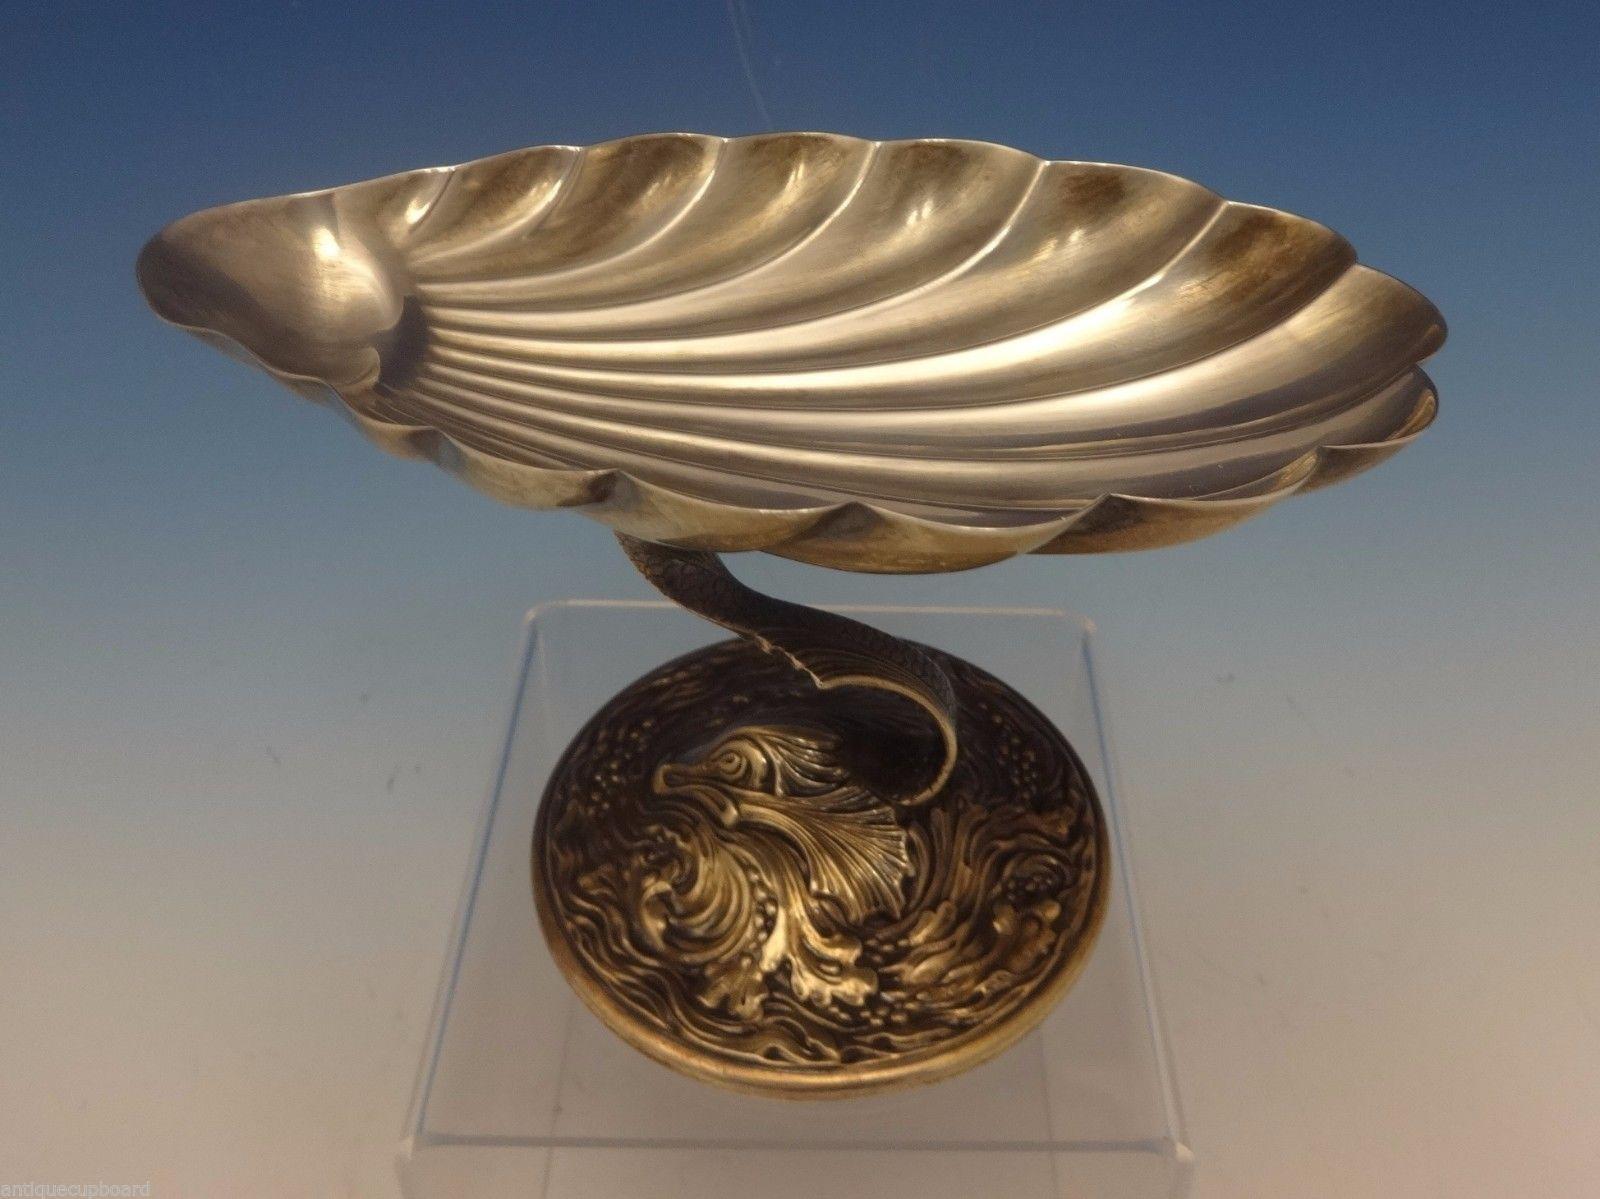 Gorham-Durgin
Gorham-Durgin sterling silver pair of raised compotes marked #107. They feature a seashell bowl atop a dolphin on a water and seaweed base. These pieces measure 4 tall, 5 3/4 long, and have a combined weight of 10.4 ozt. They date